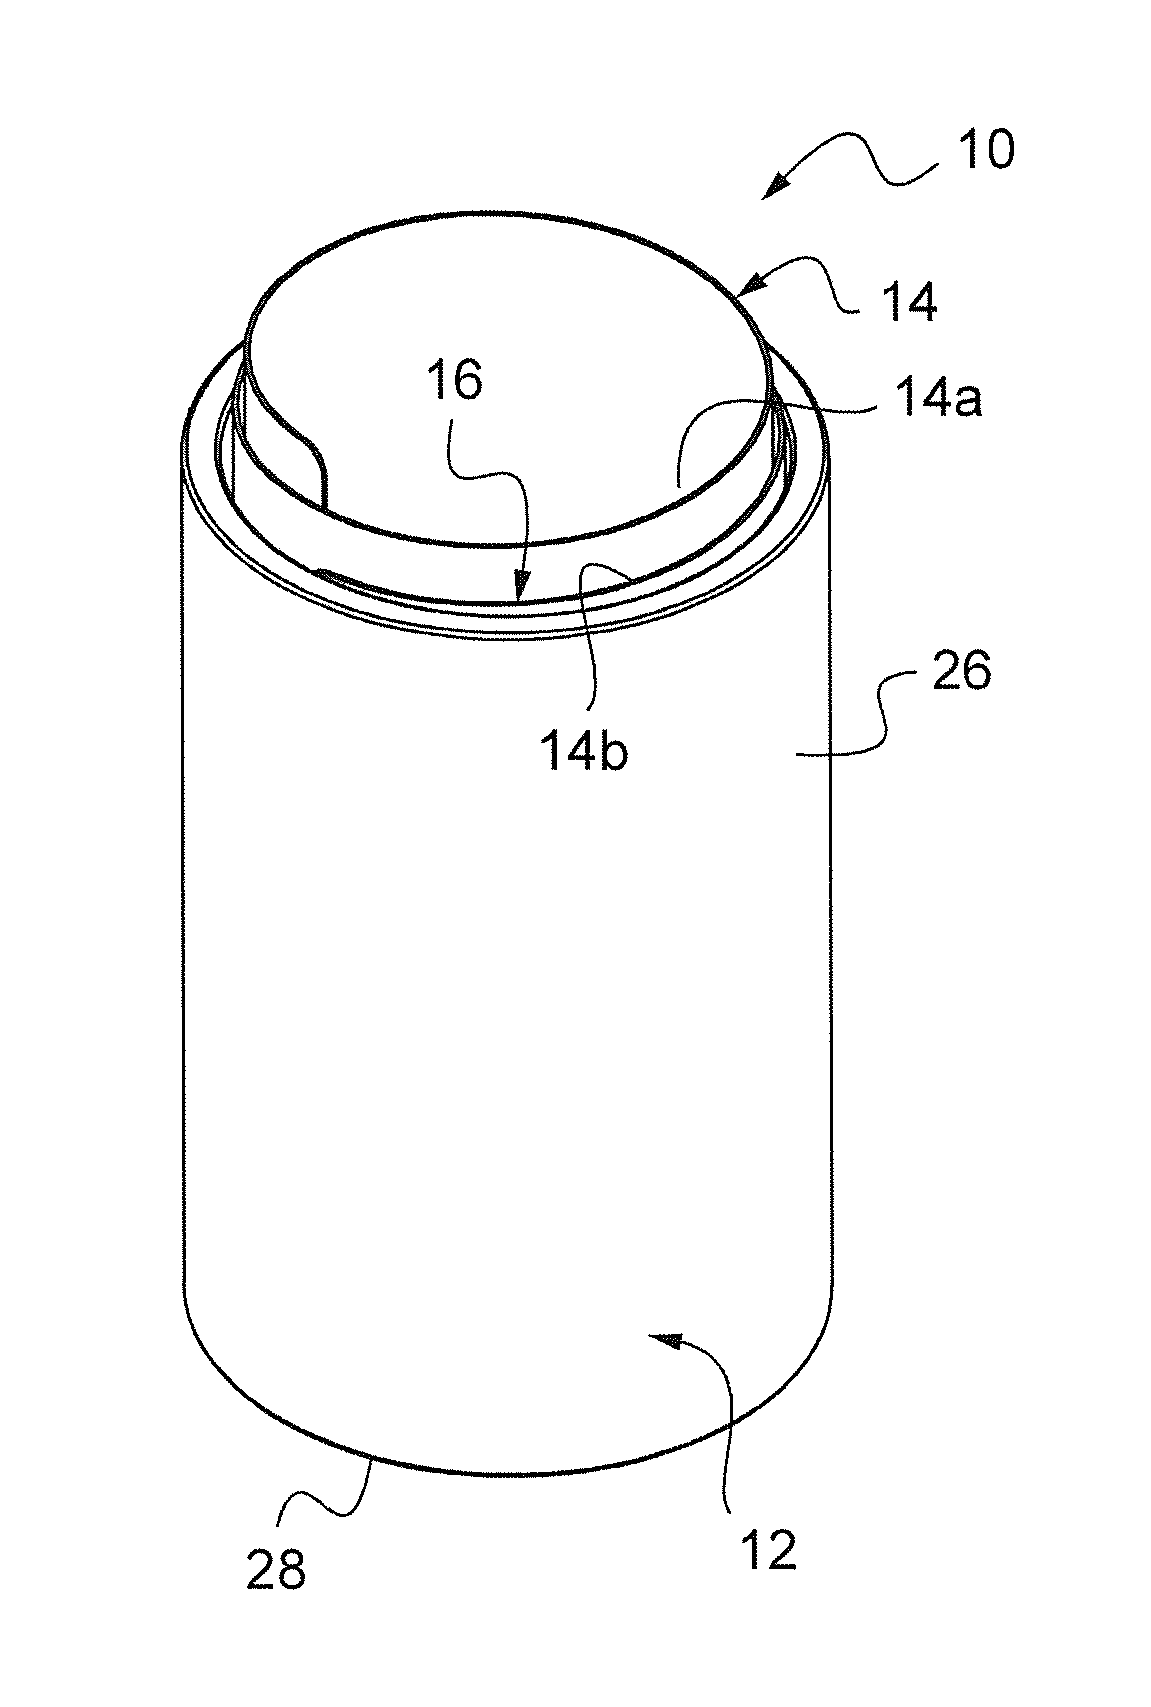 Device for holding kitchen utensils, especially knives